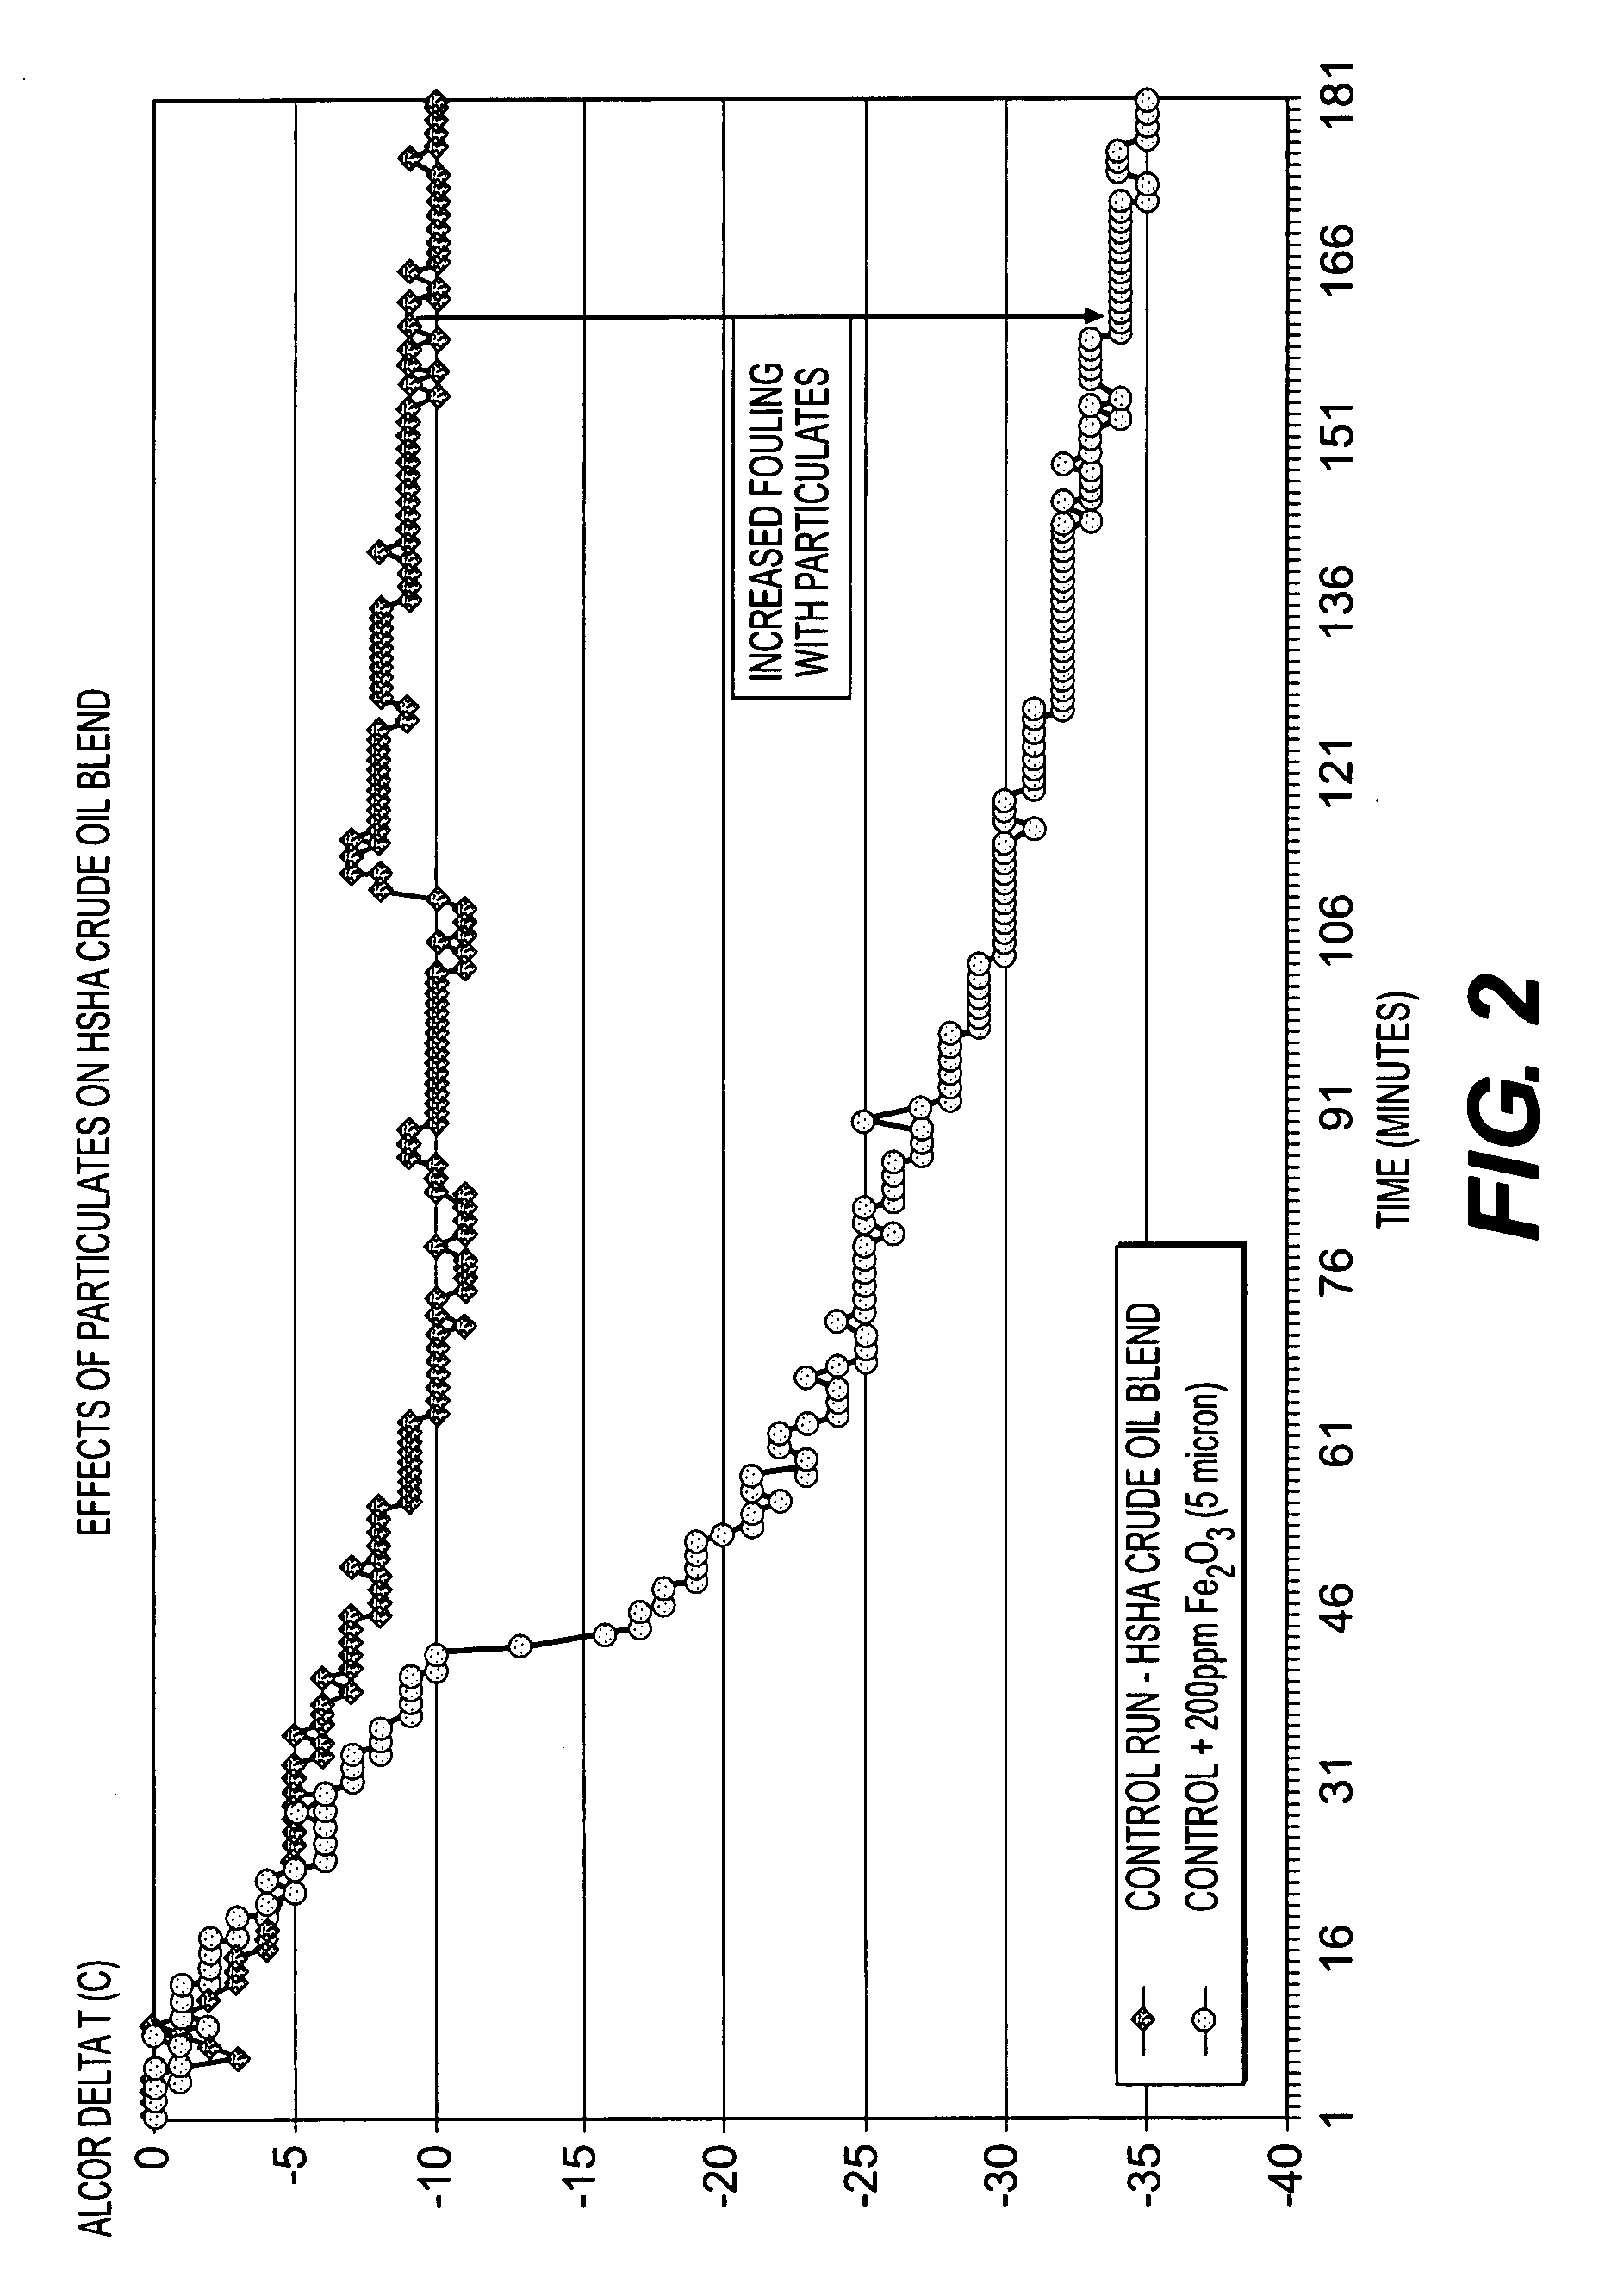 Method of blending high tan and high SBN crude oils and method of reducing particulate induced whole crude oil fouling and asphaltene induced whole crude oil fouling